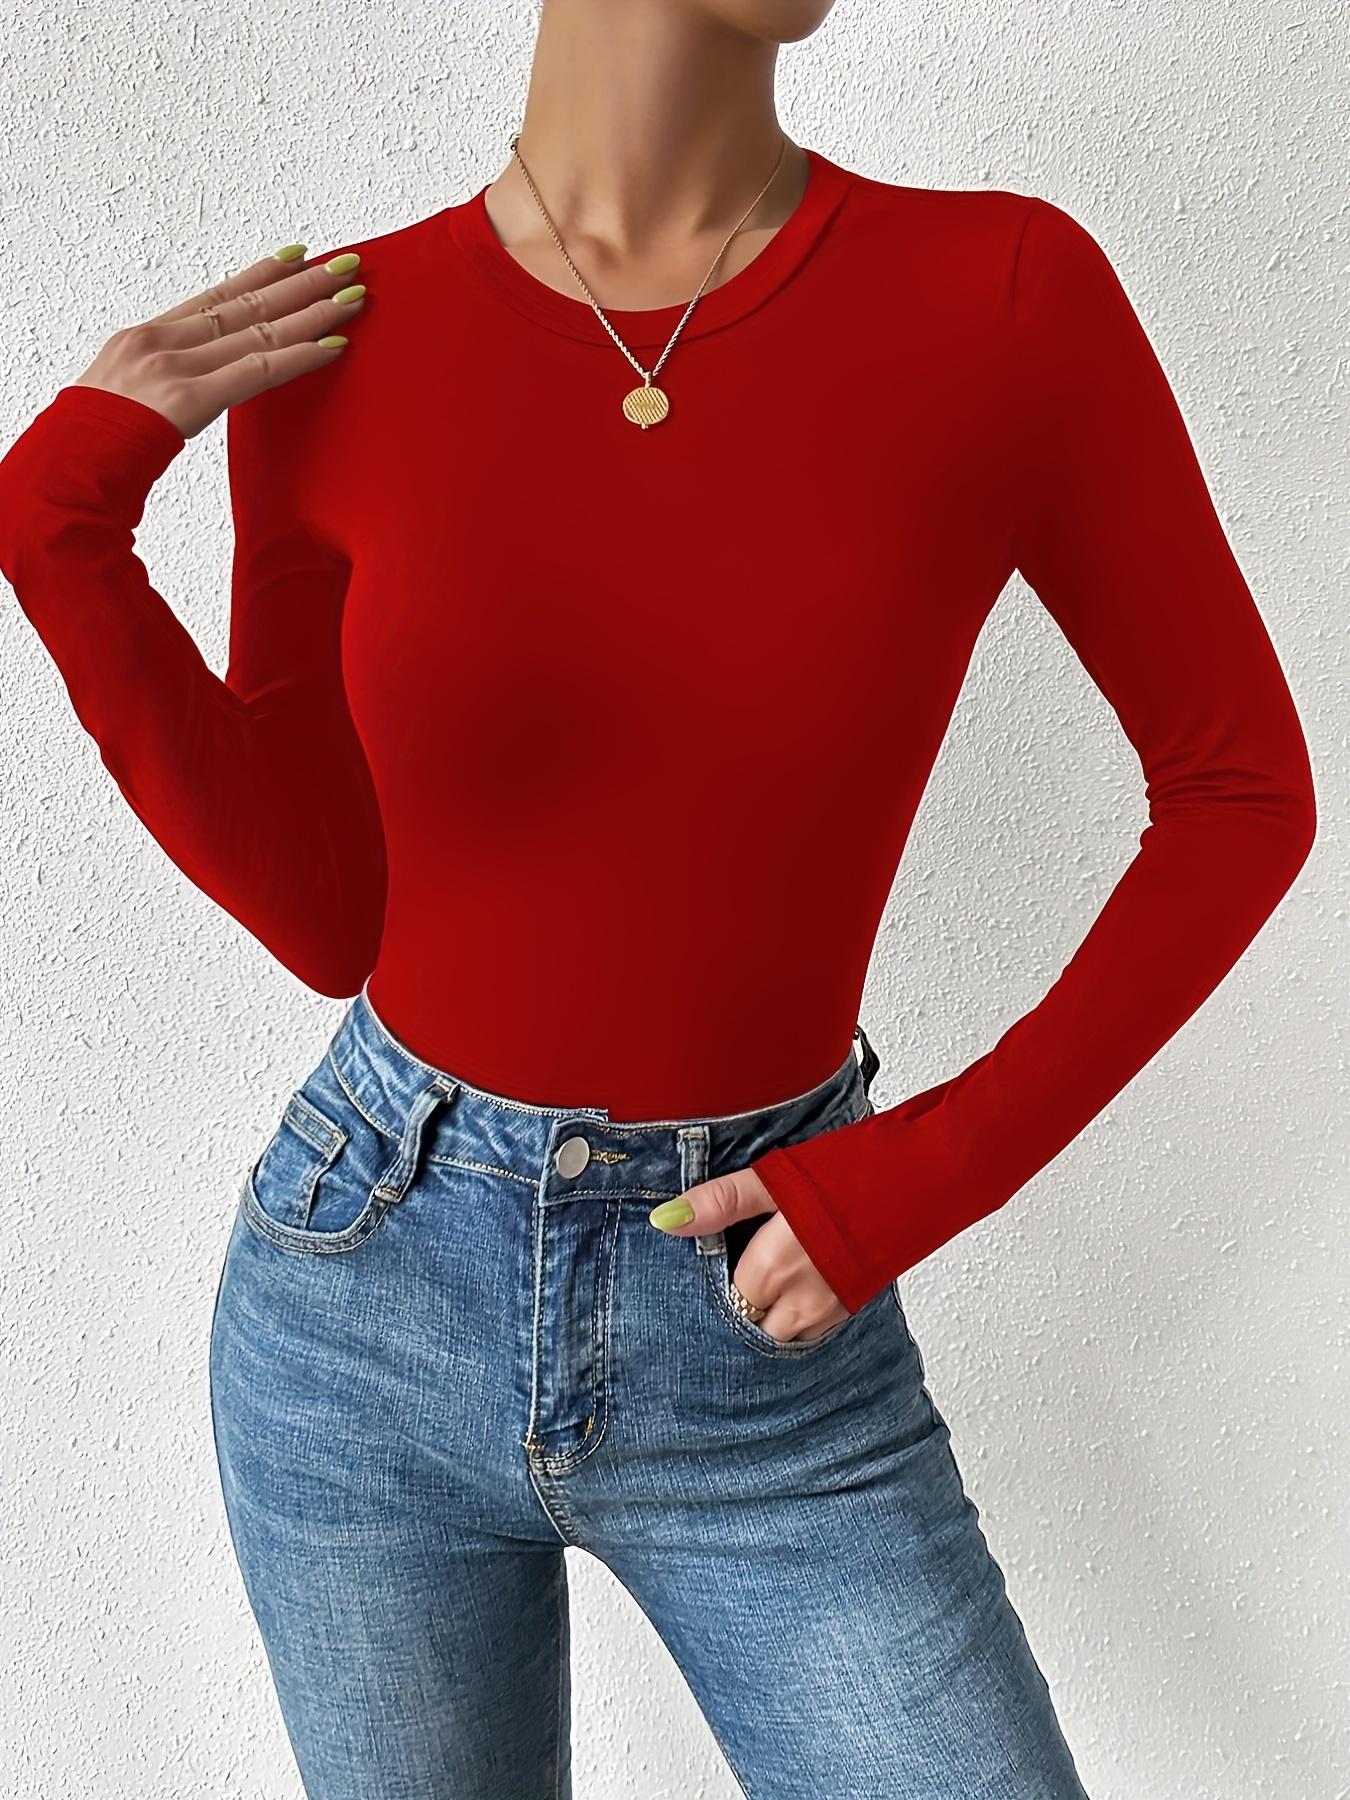  Cheap Clothes for Women Long Sleeve T Shirt Women Crew Neck  Solid Stretch Slimcasual Blouse Top Thin Skinny Winter Classic Bottoming  Shirts : Clothing, Shoes & Jewelry